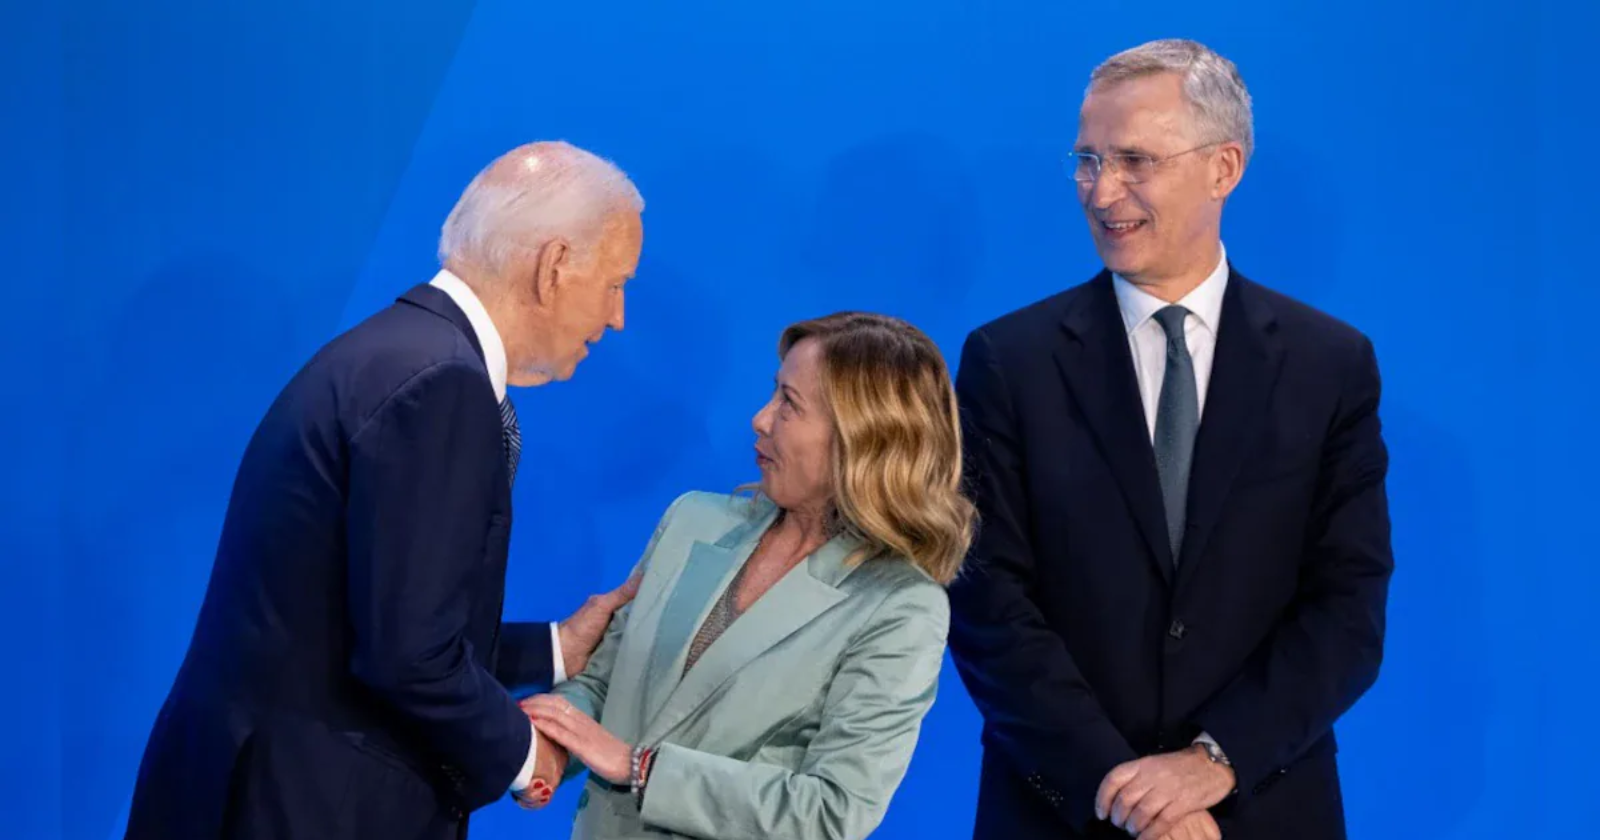 WATCH Giorgia Meloni Rolls Eyes As Biden Arrives Late at